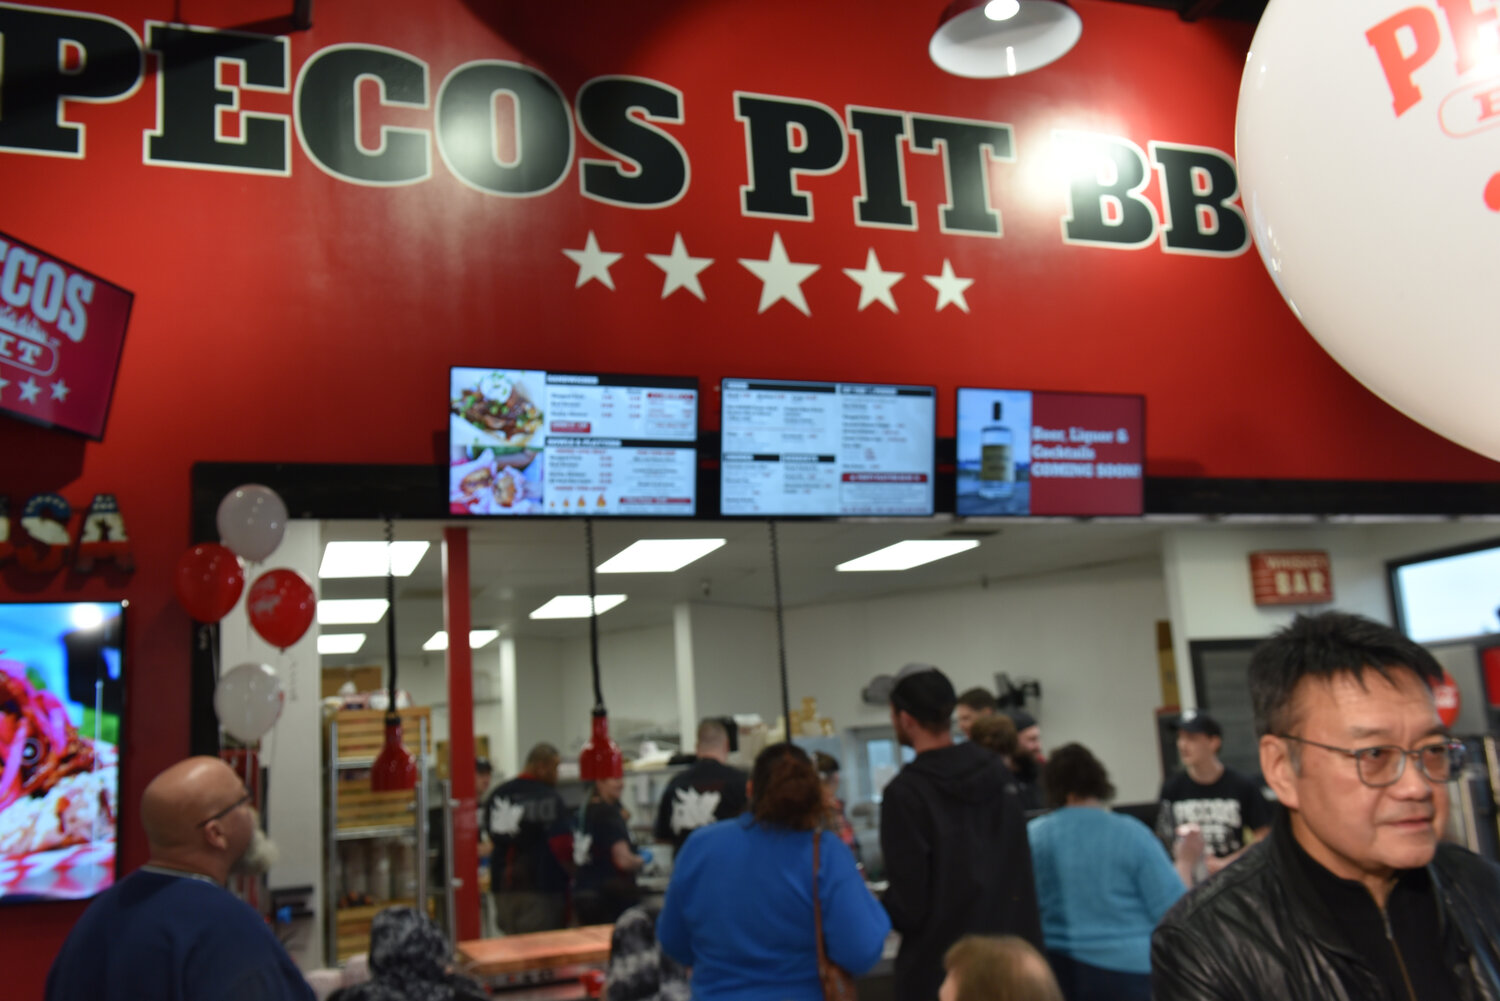 Customers at Pecos Pit Bar-B-Que order food on Friday, Jan. 26 after the restauraunt's grand opening celebration.